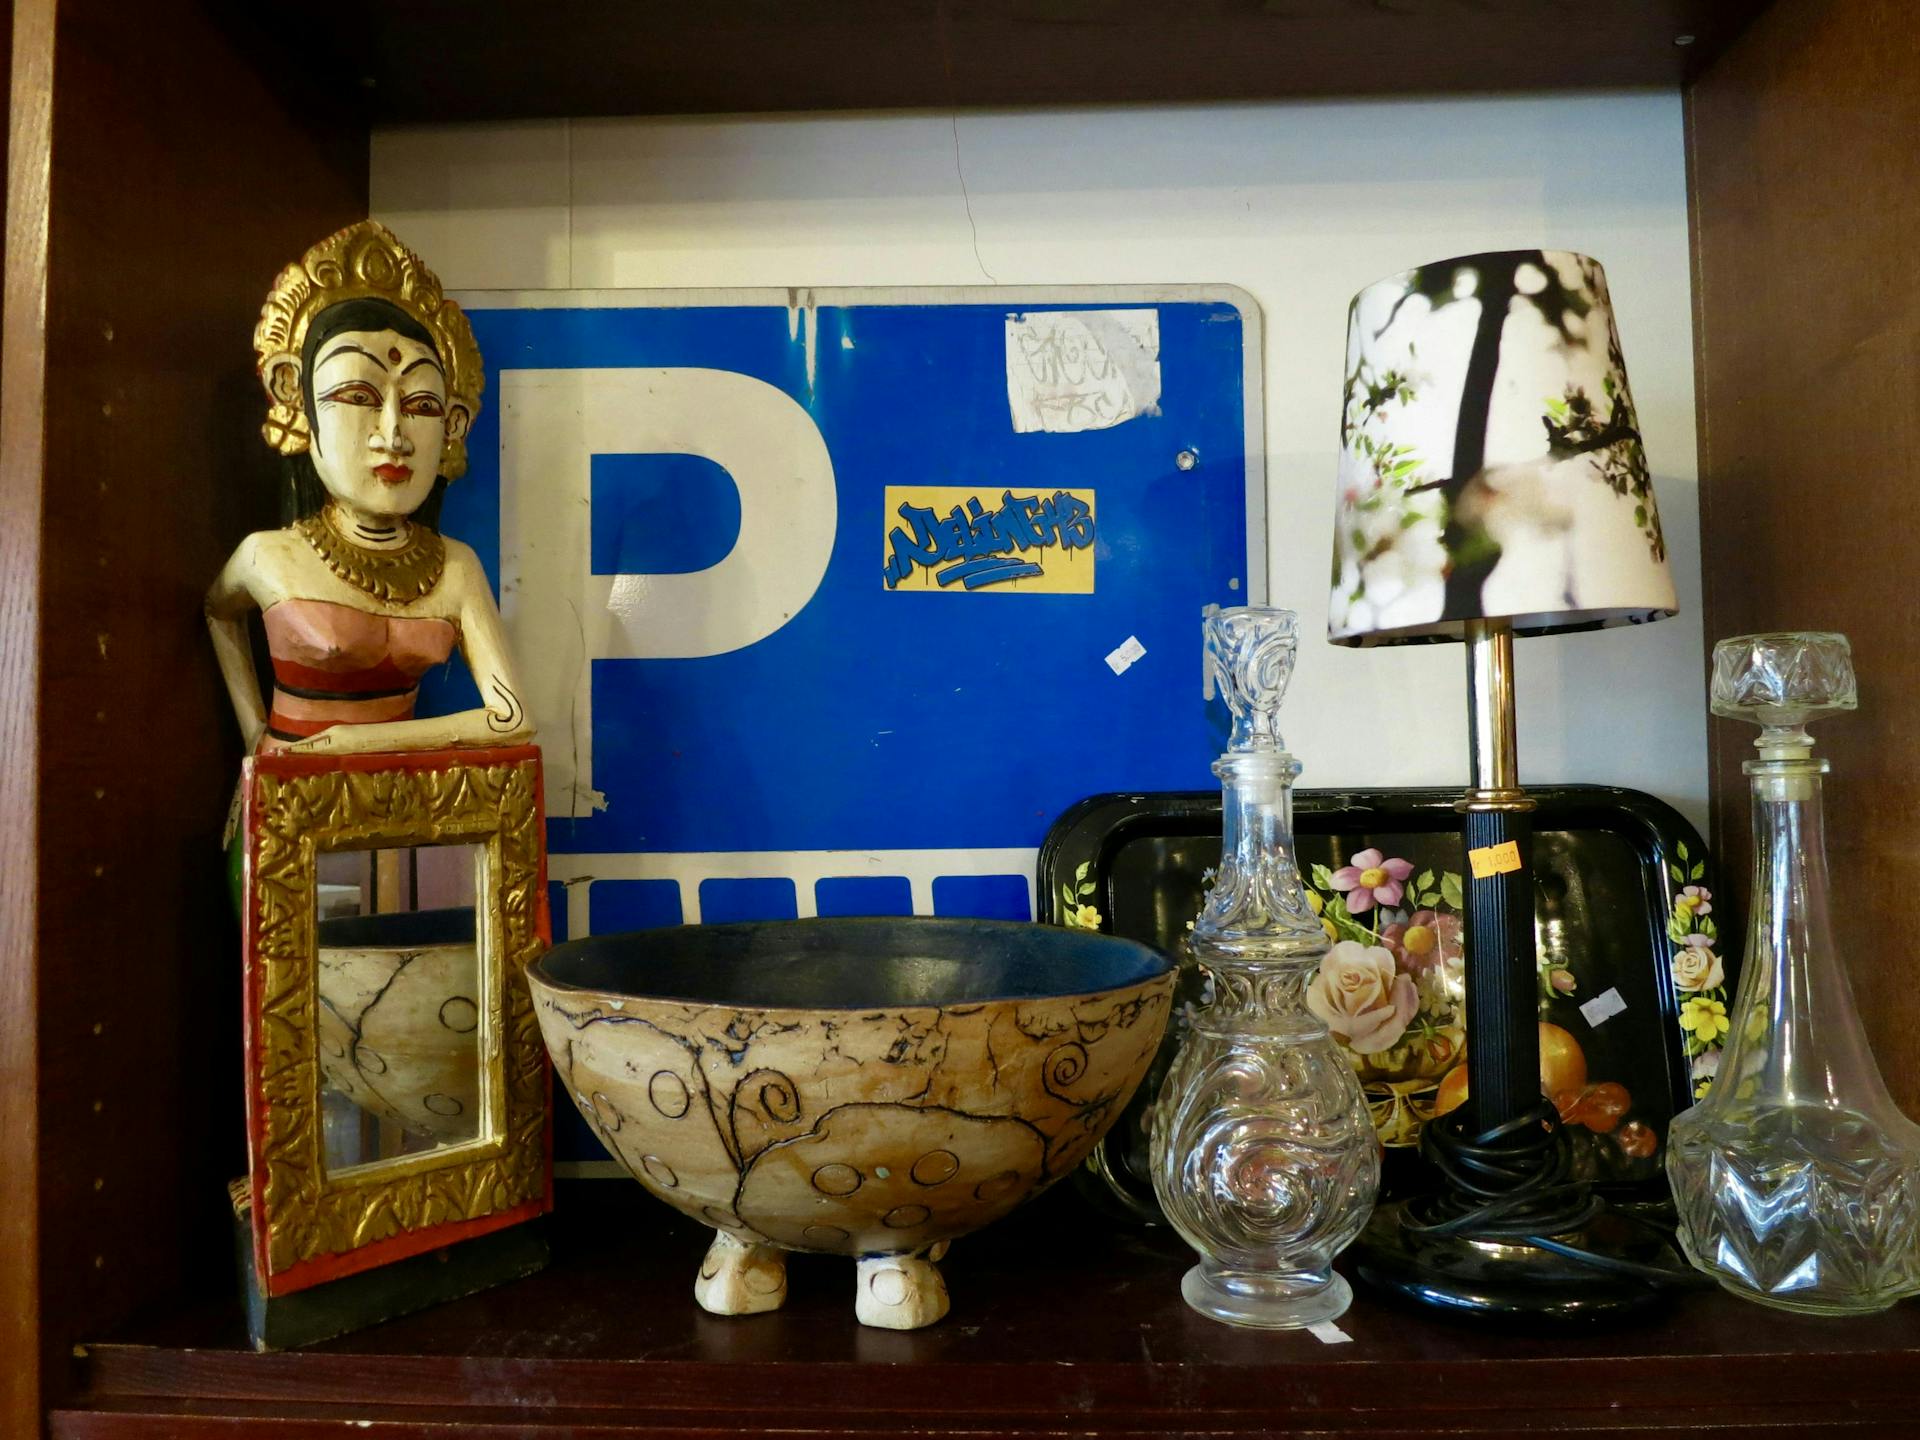 Random objects and a parking traffic sign on display at a thrift store. 